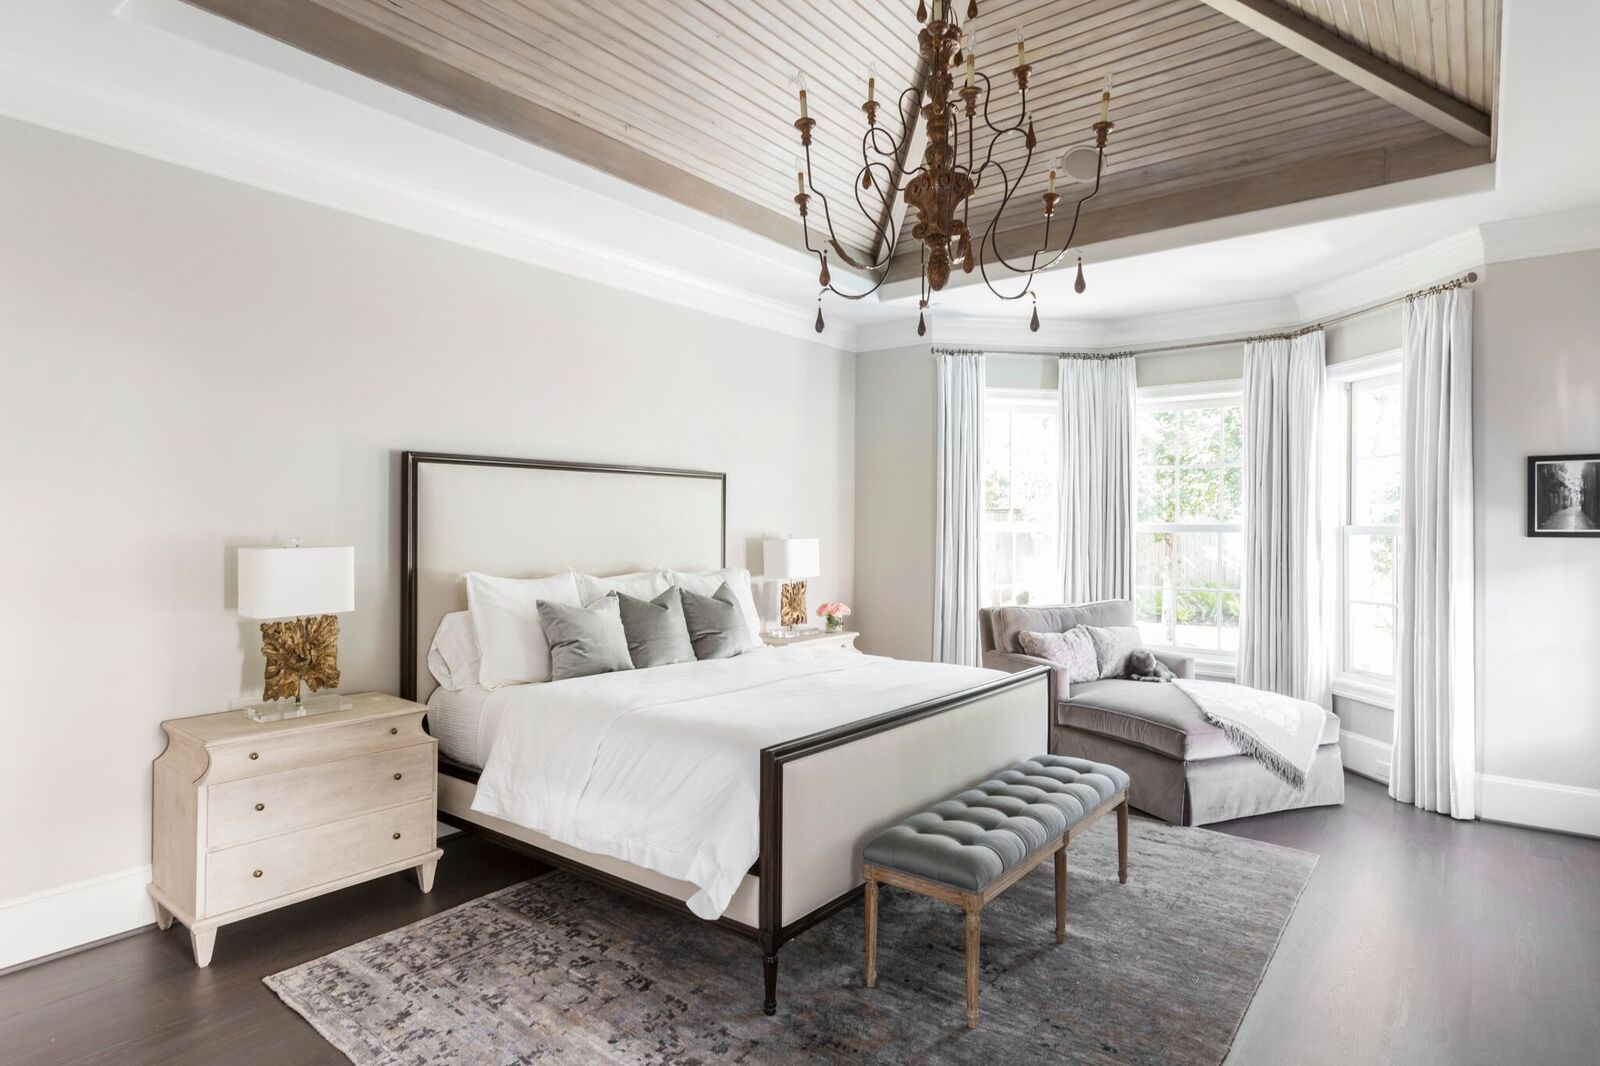 Crisp white Master bedroom, Vaulted Ceiling, Gold accents